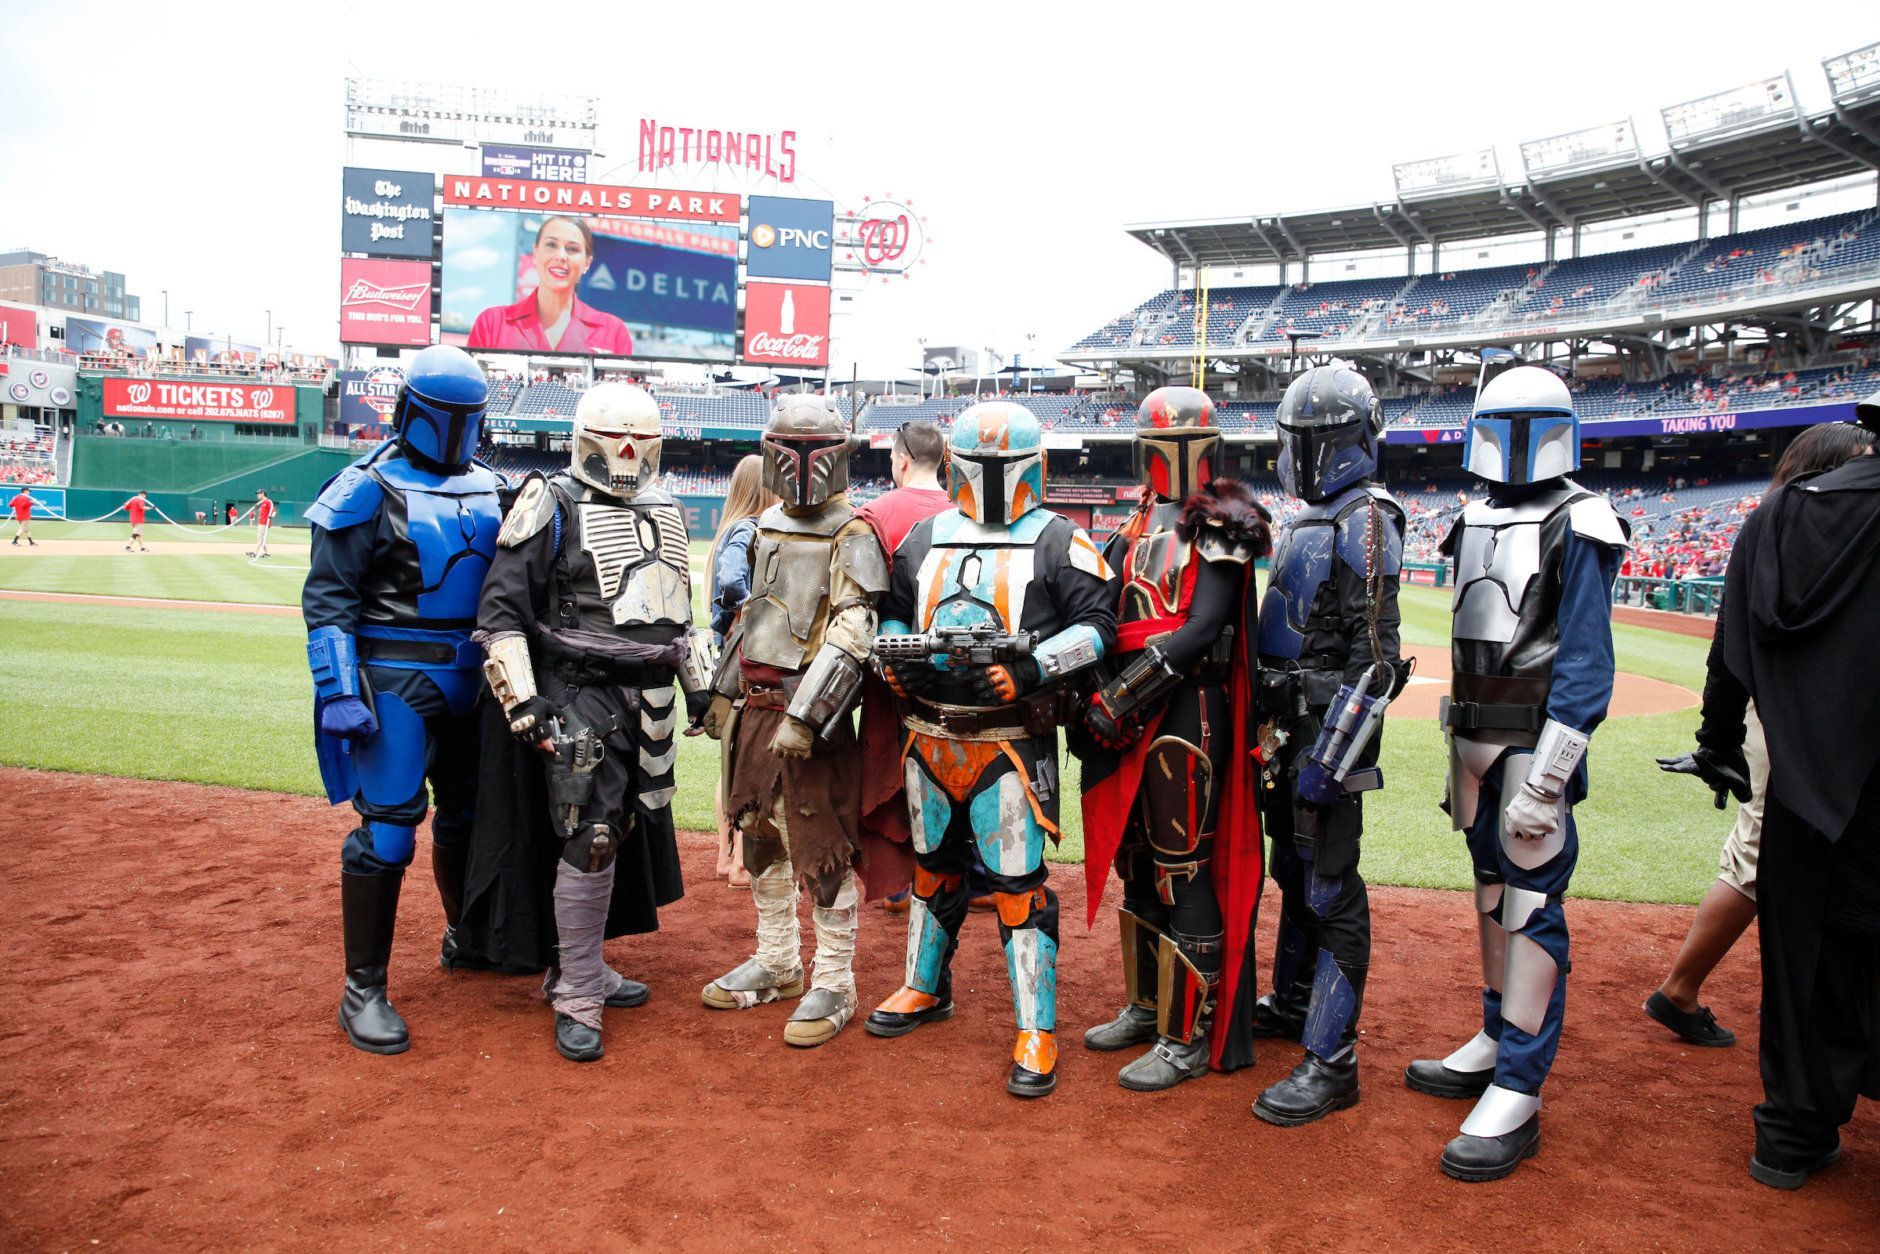 Star Wars Day at Nationals Park is June 15. The first was in 2015. (Courtesy Washington Nationals Baseball Club)